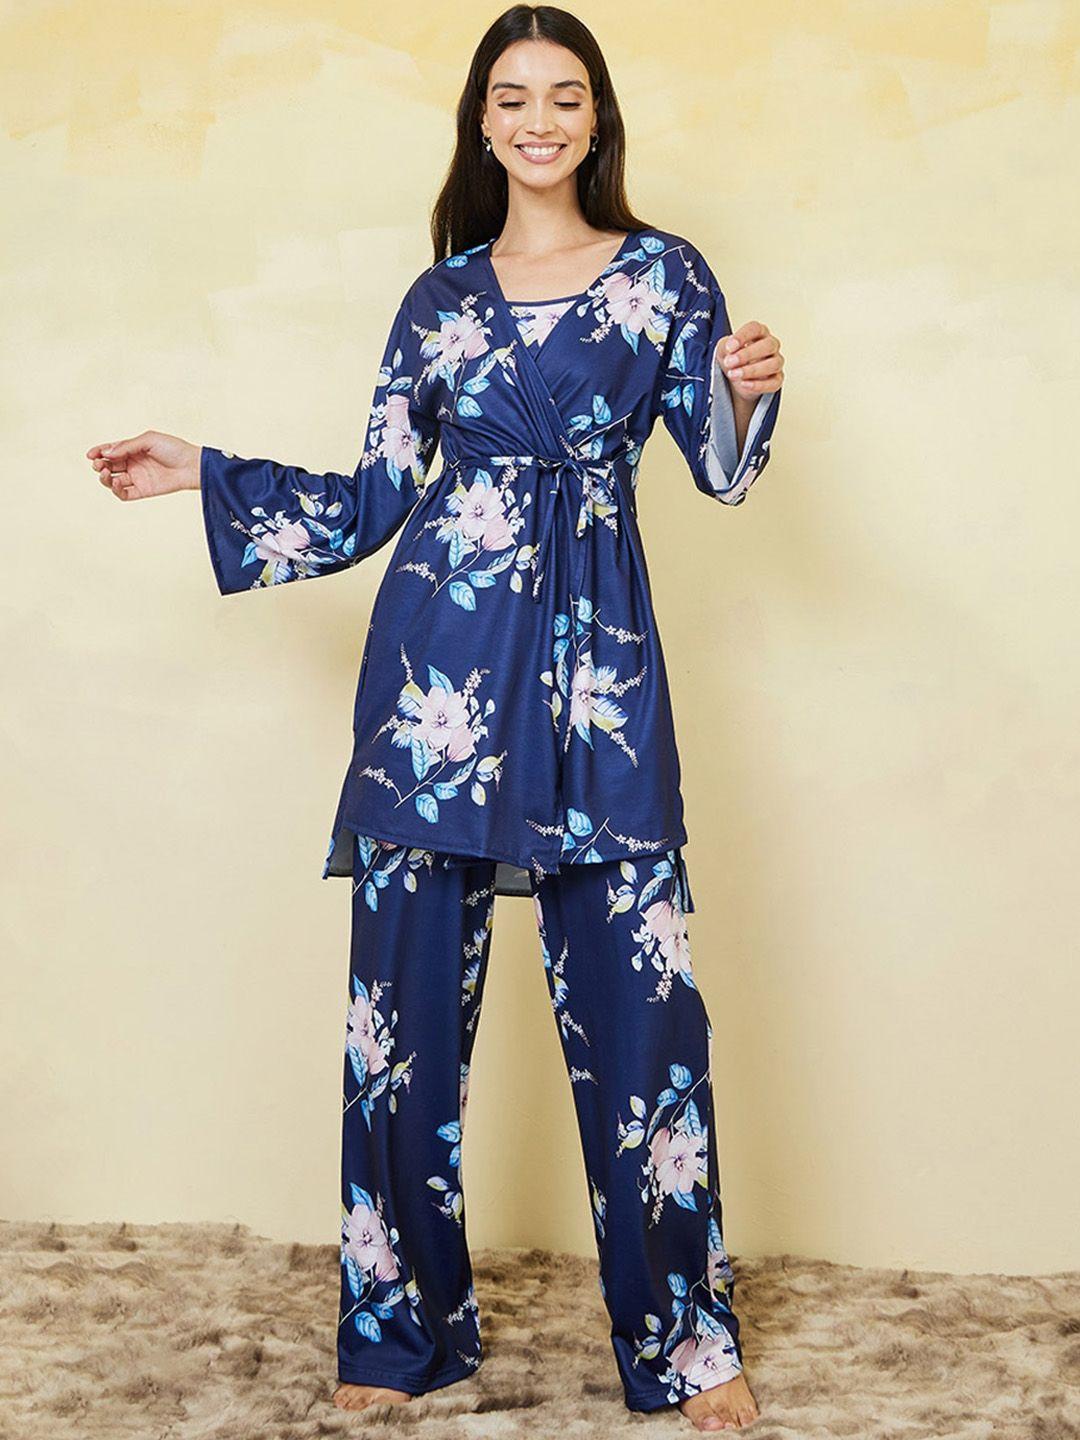 styli 3 pieces floral printed night suit